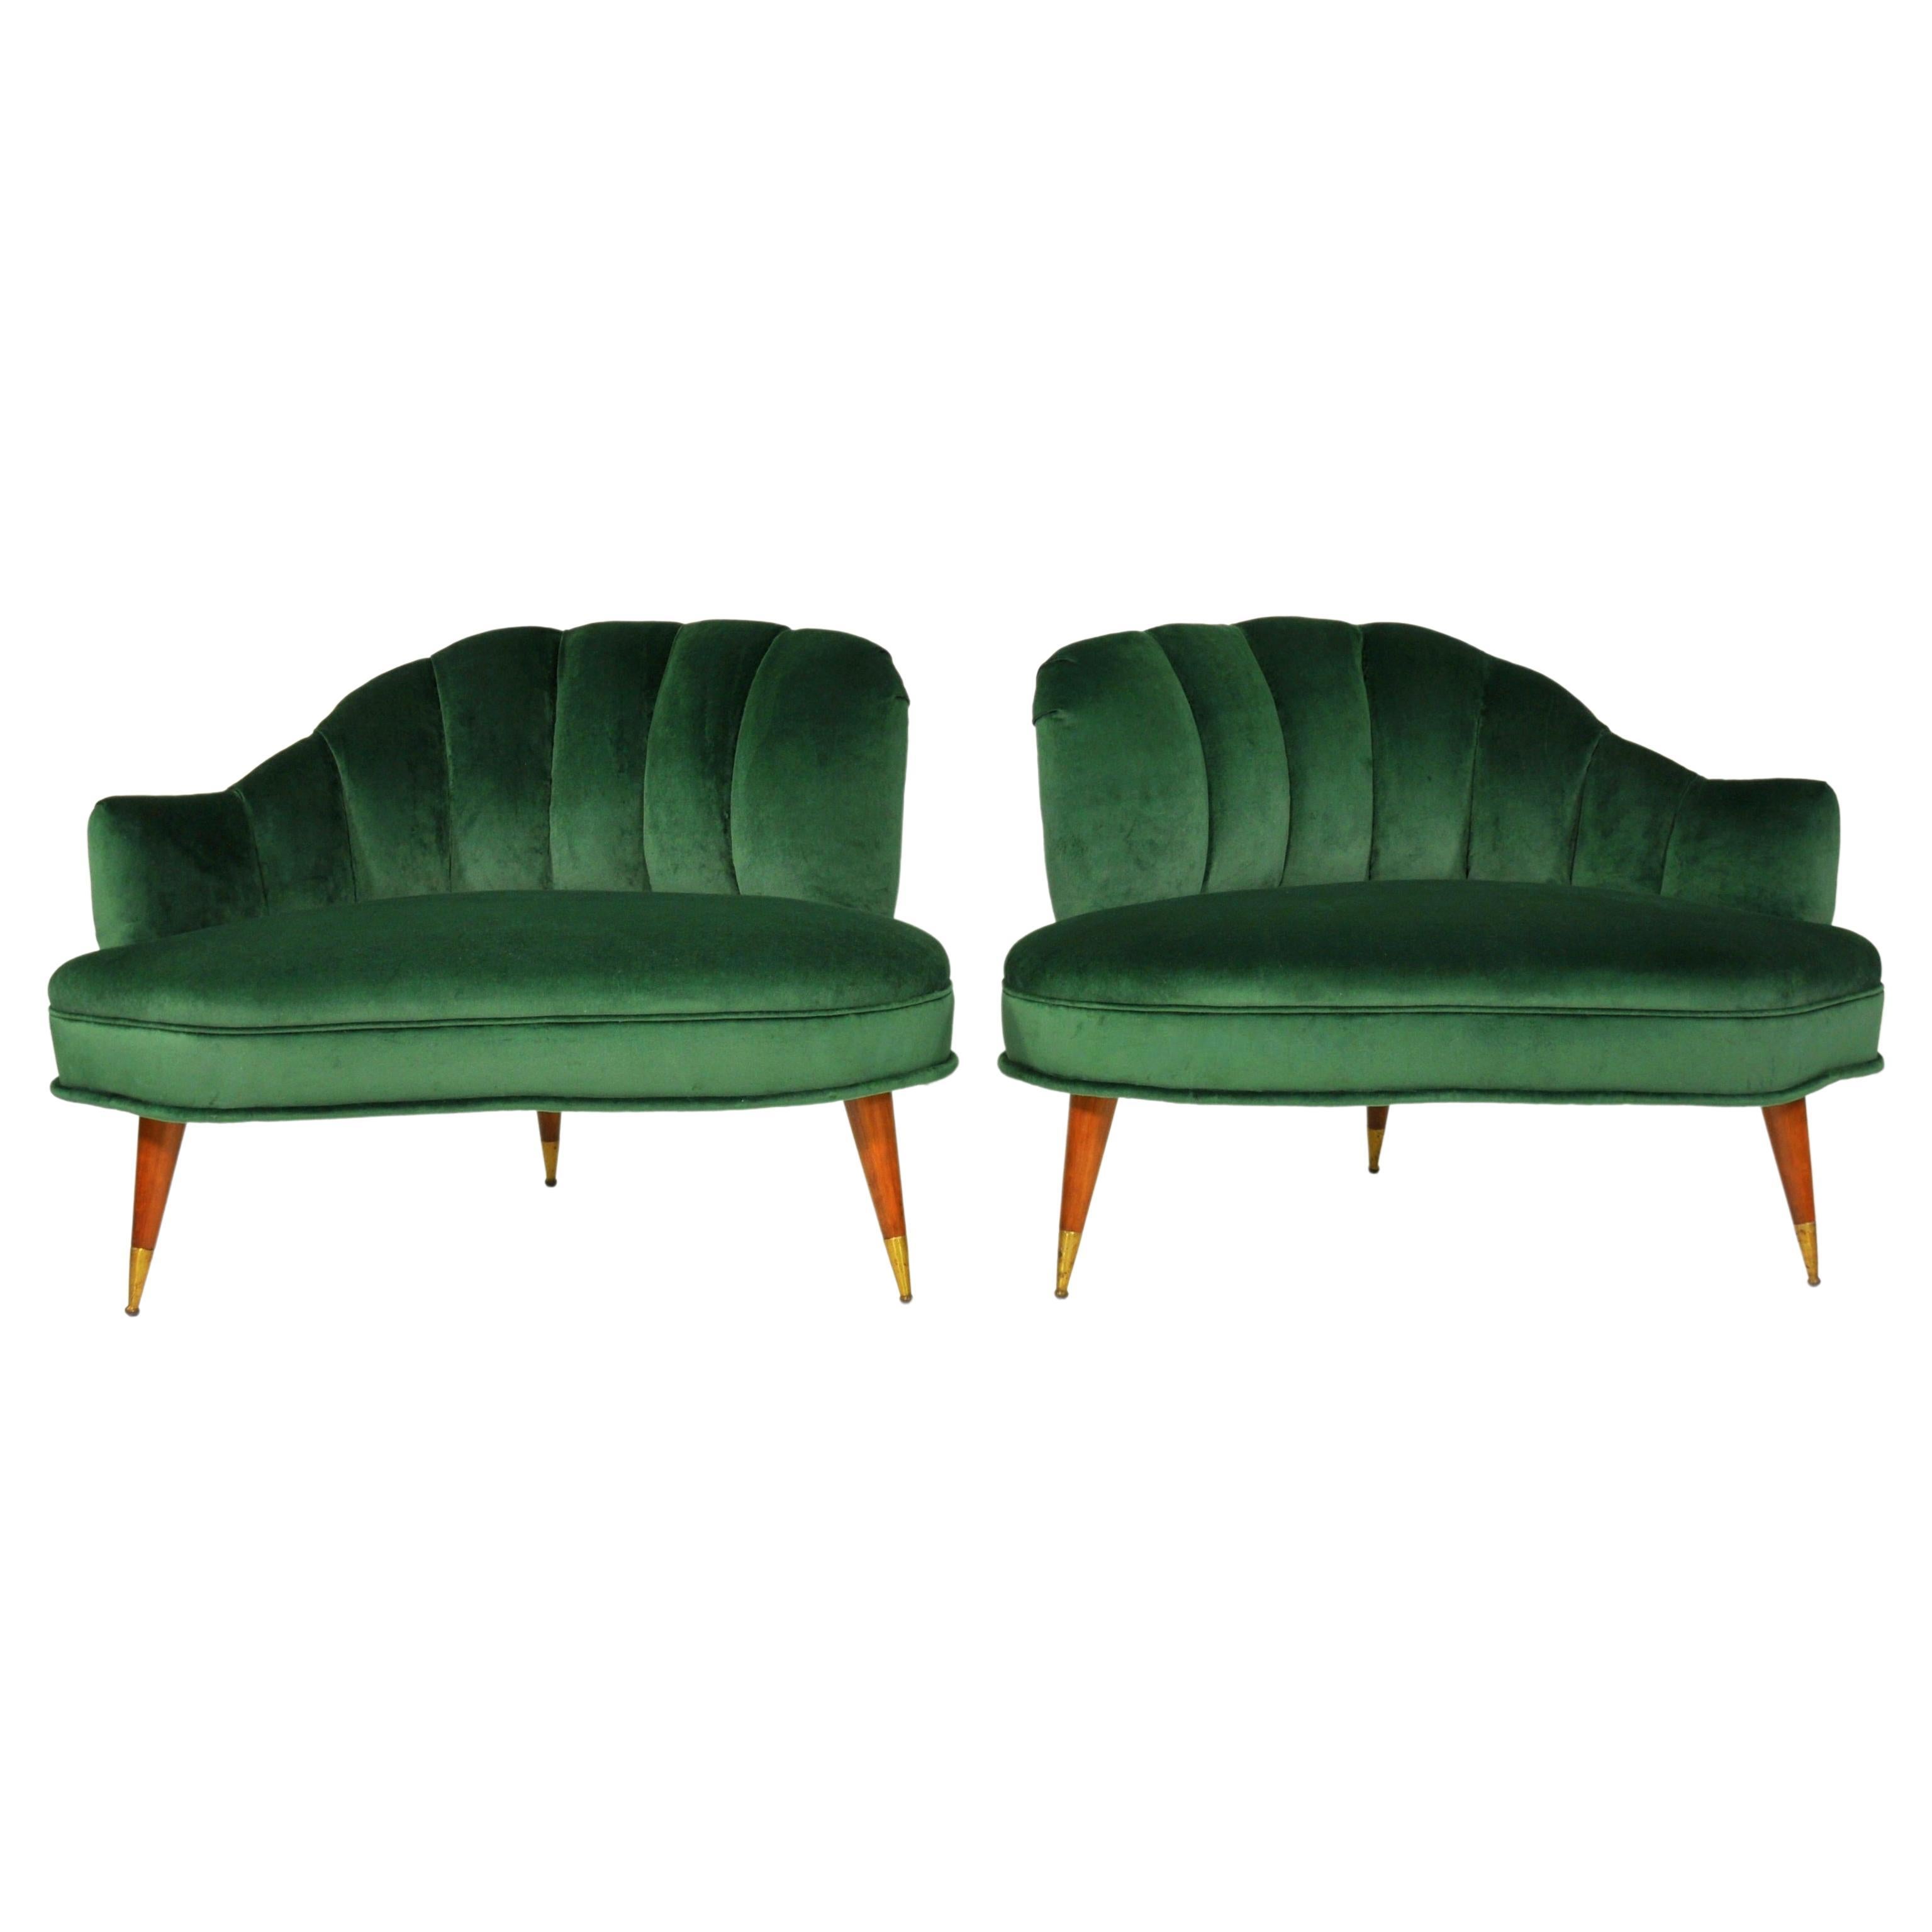 20th Century Hollywood Regency Mid-Century Modern Channel Back Lounge Chairs - Pair For Sale